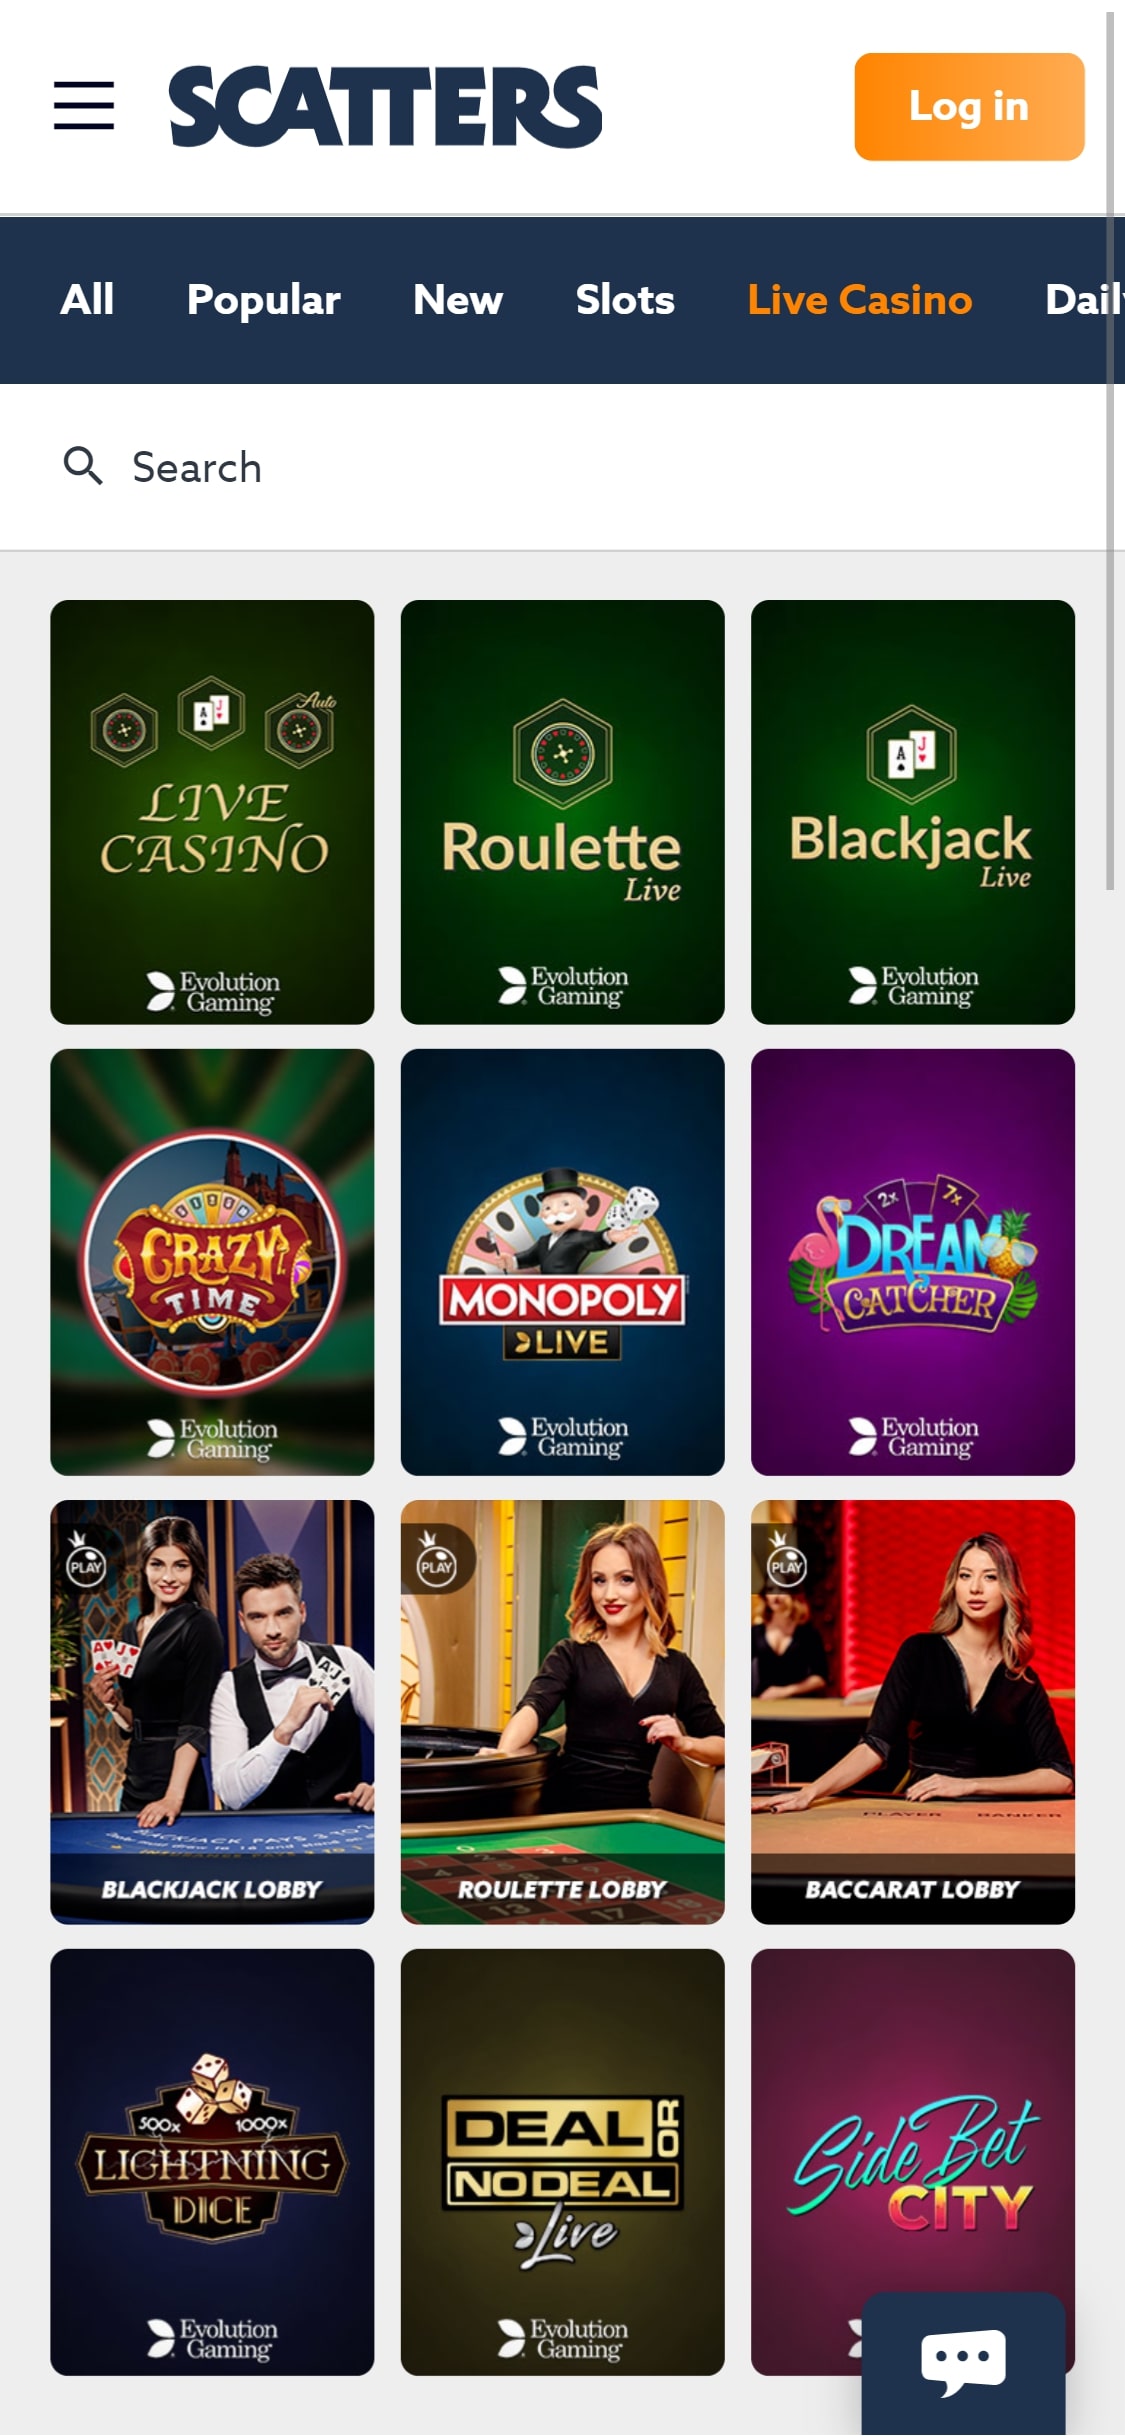 Scatters Casino Mobile Live Dealer Games Review